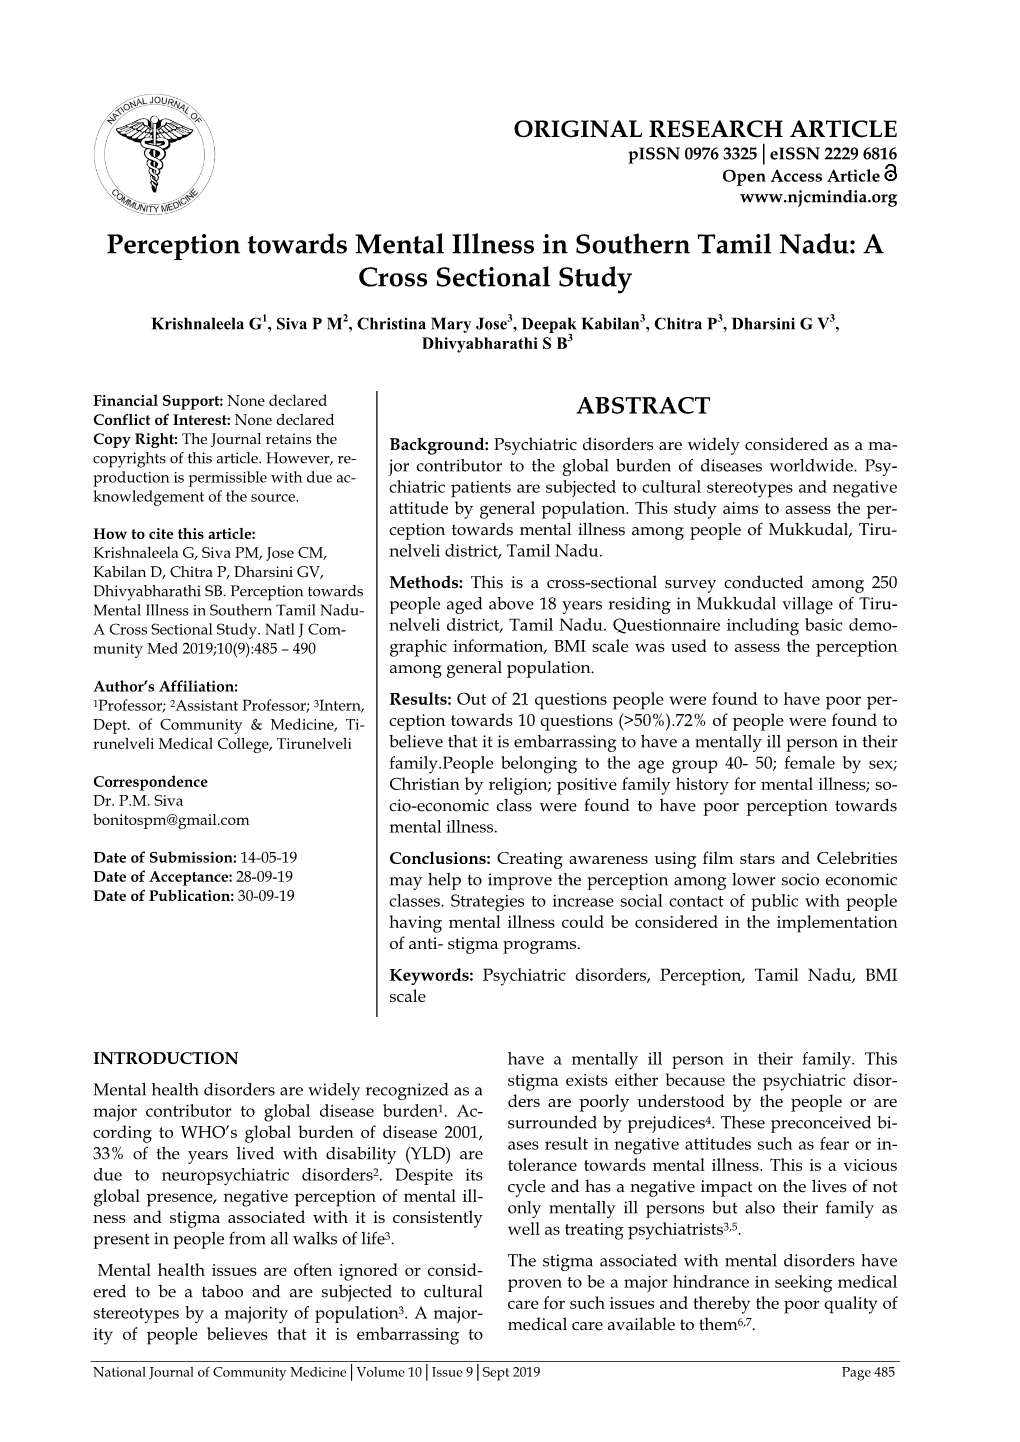 Perception Towards Mental Illness in Southern Tamil Nadu: a Cross Sectional Study